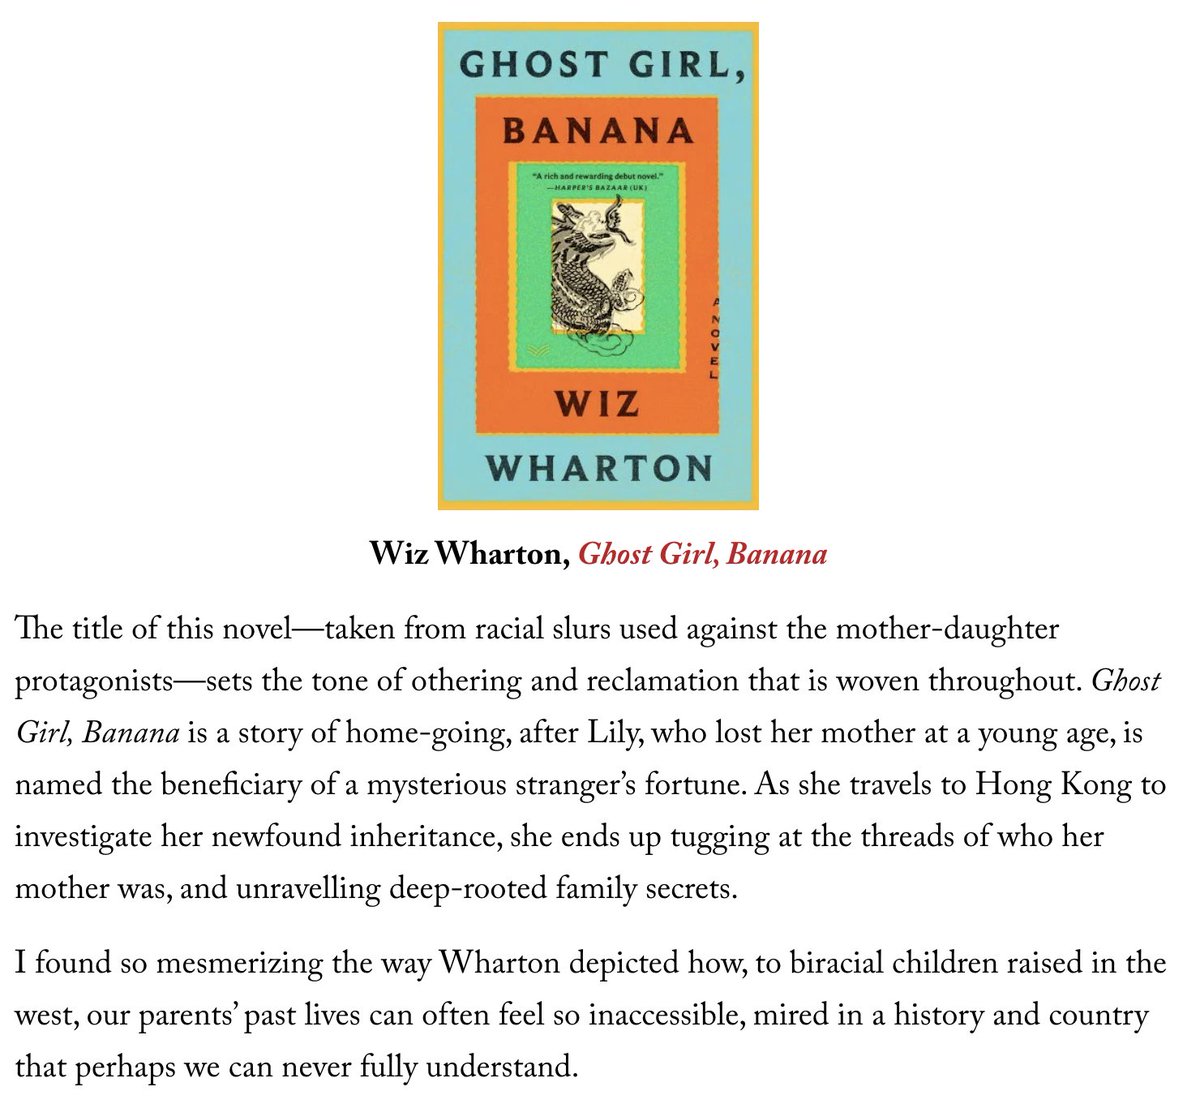 I am grateful and honoured to have #GhostGirlBanana recommended by the wonderful Ela Lee in this article on @lithub. Ela's #Jaded is a must-read novel about disconnection, biracial identity and the process of self-discovery and recovery: lithub.com/colorism-code-…